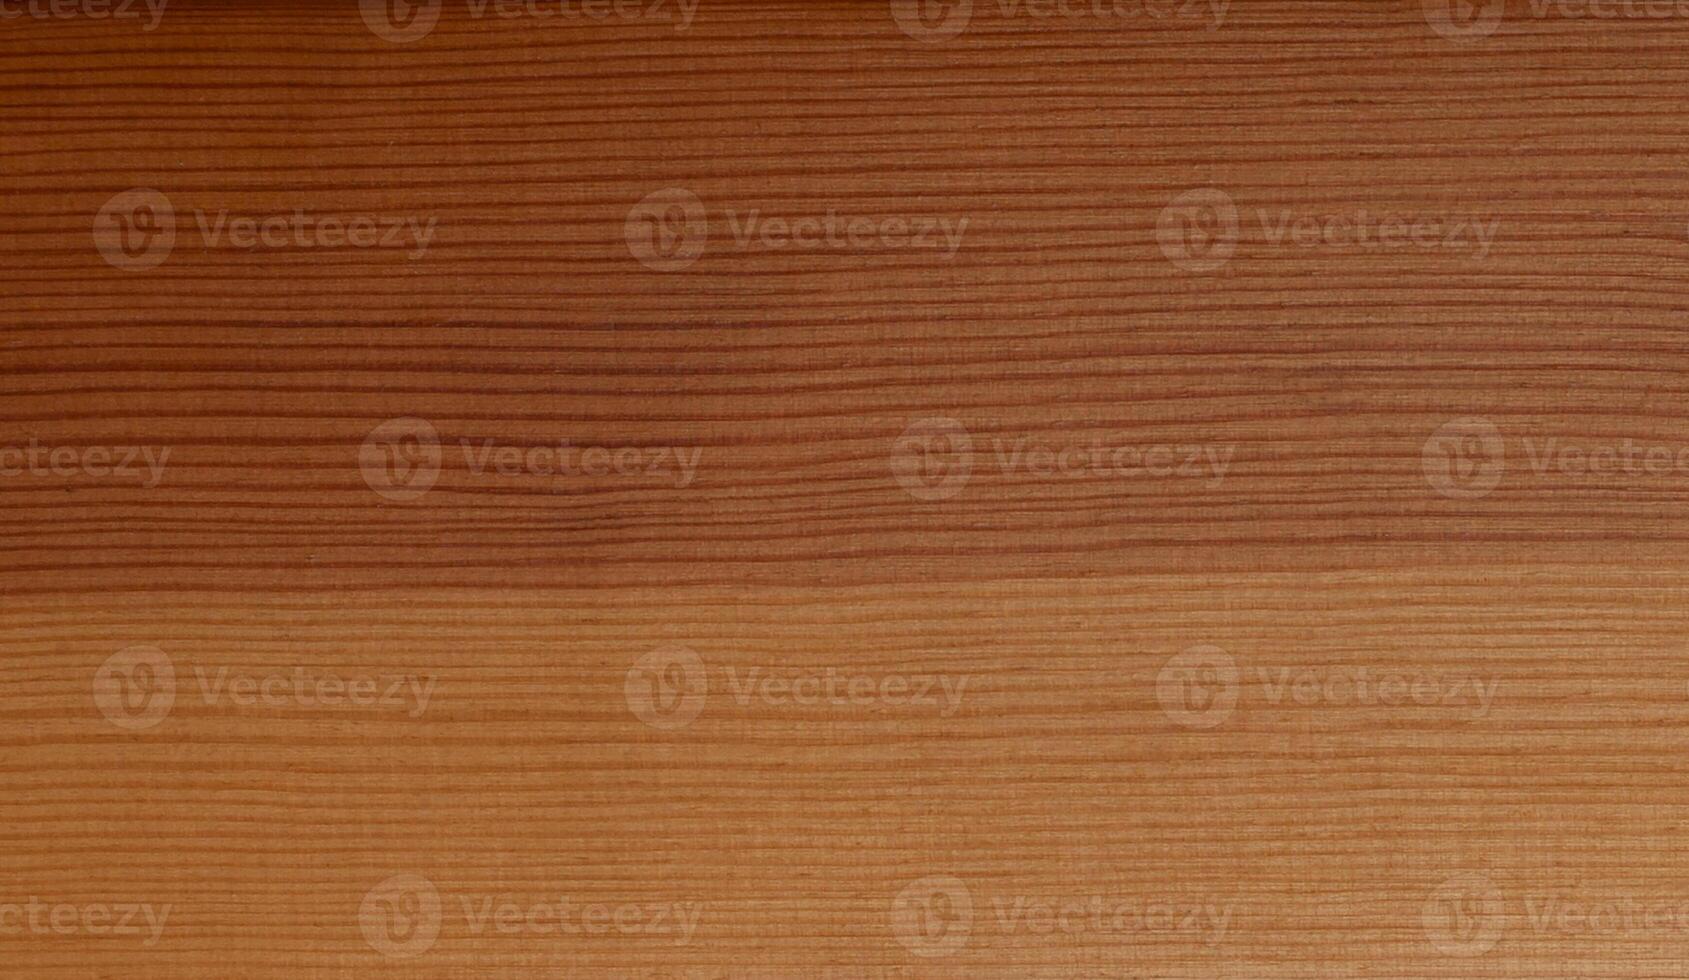 The surface of the brown wood texture photo